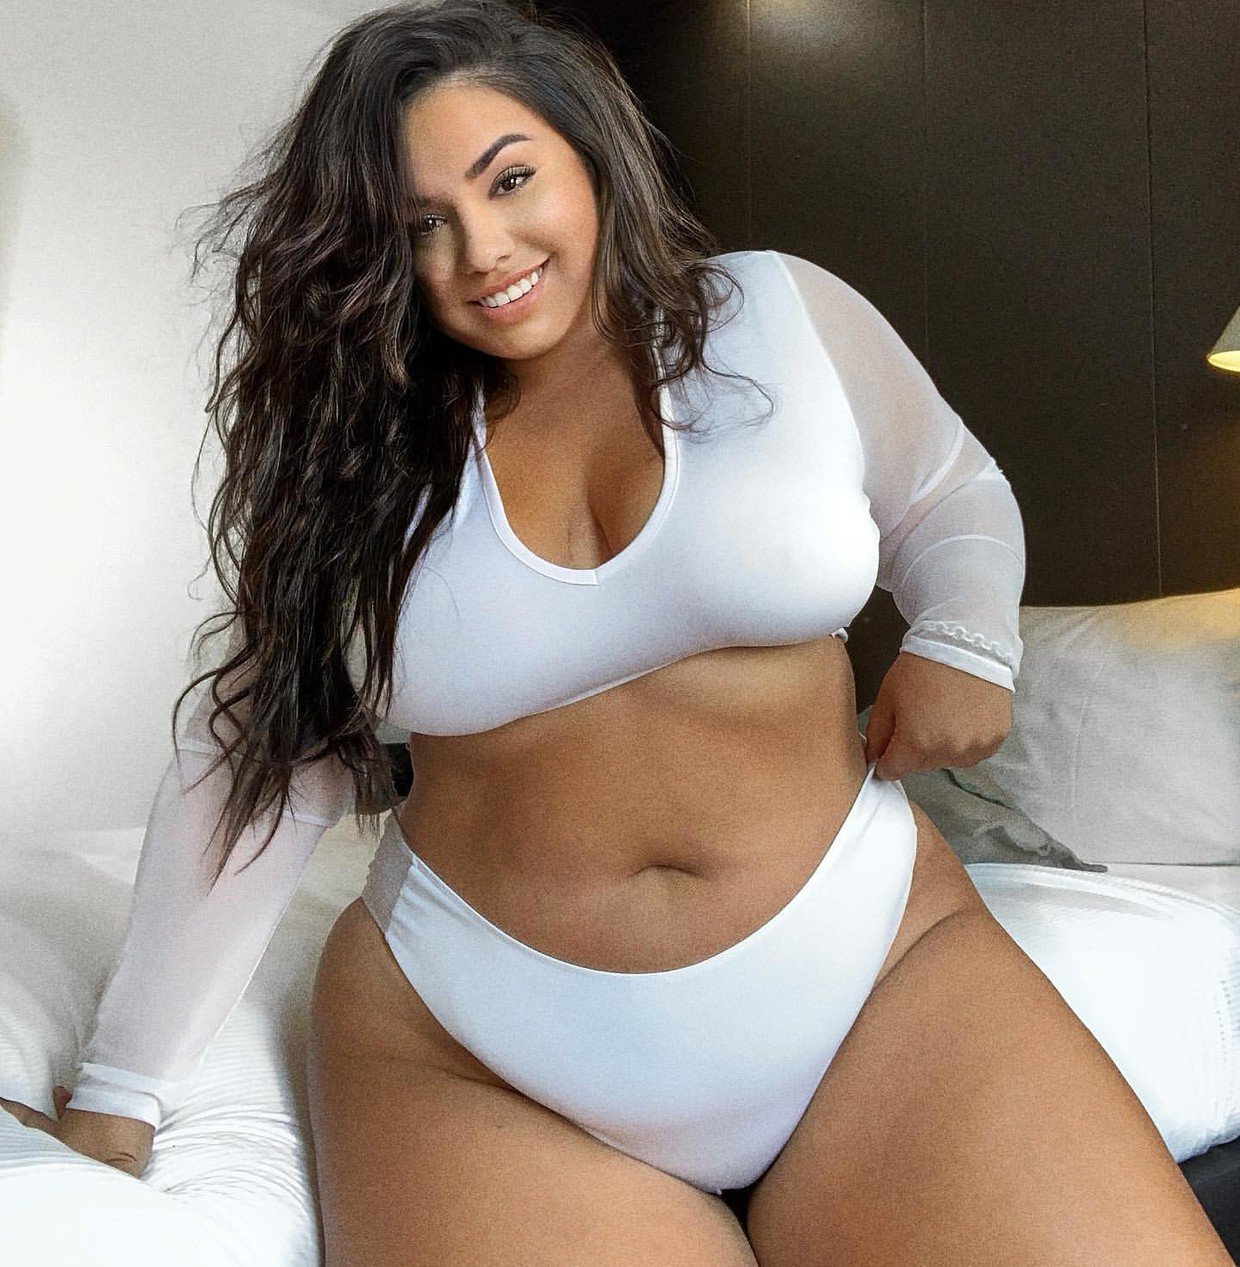 Curvy model gets wet and wild as she flaunts figure in nude